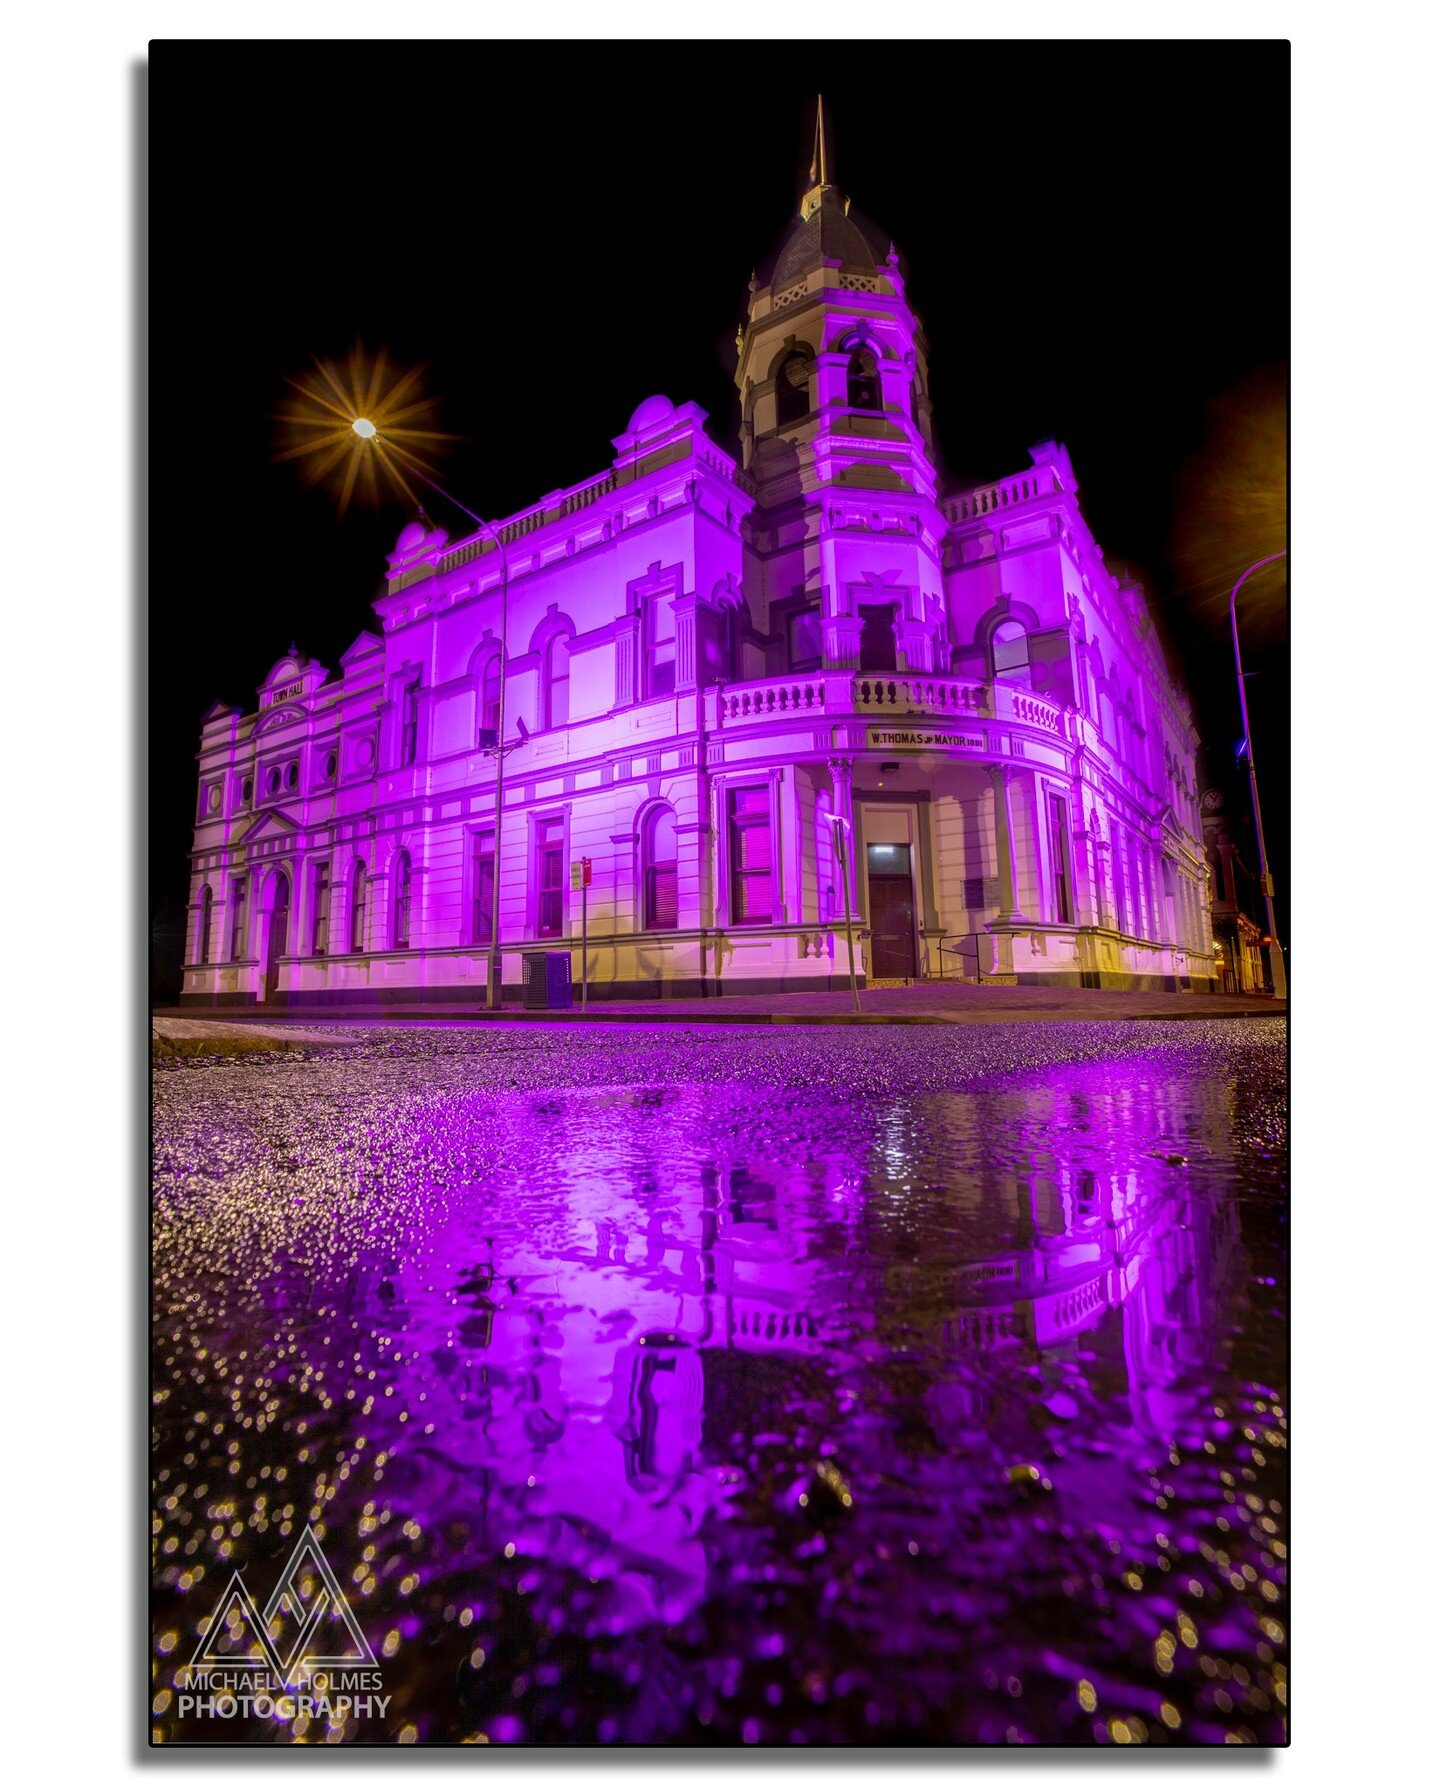 Forbes Town Hall glowing purple after a good downpour of rain.

#forbesnsw #amazingforbes #forbesnsw2871 #forbesshirecouncil #forbesshire #forbesphotography #lovensw #visitnsw #unearthcentralnsw #sculpturedownthelachlan #heritagetrail #centralwestnsw